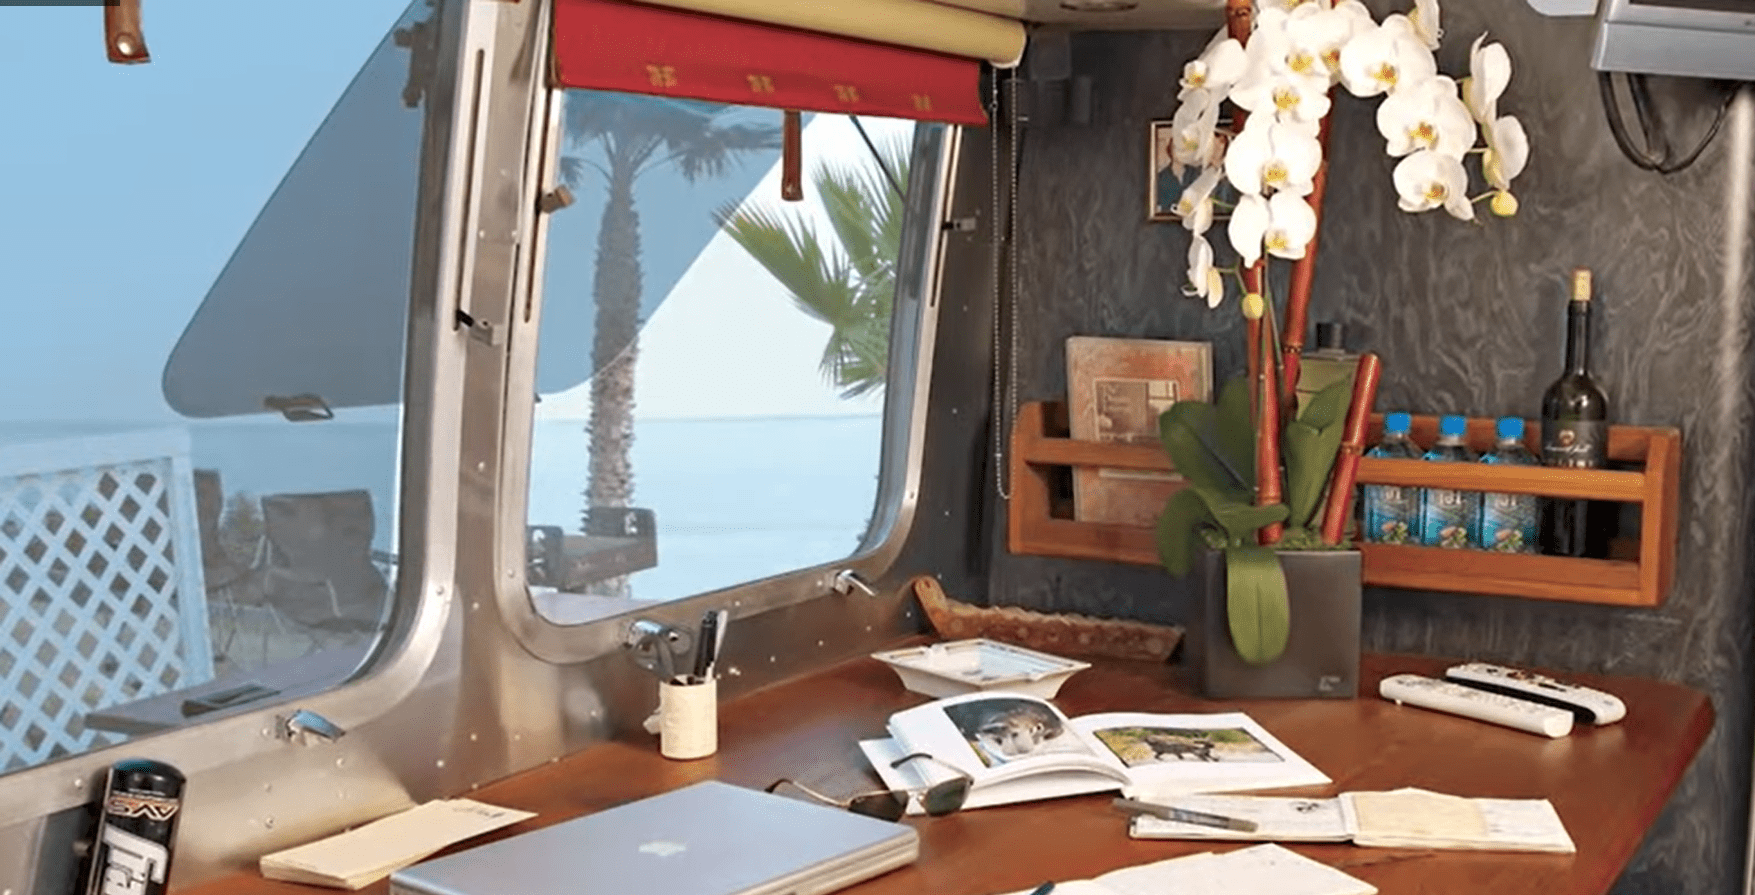 A desk and windows inside an Airstream trailer | Source: YouTube/Famous Entertainment